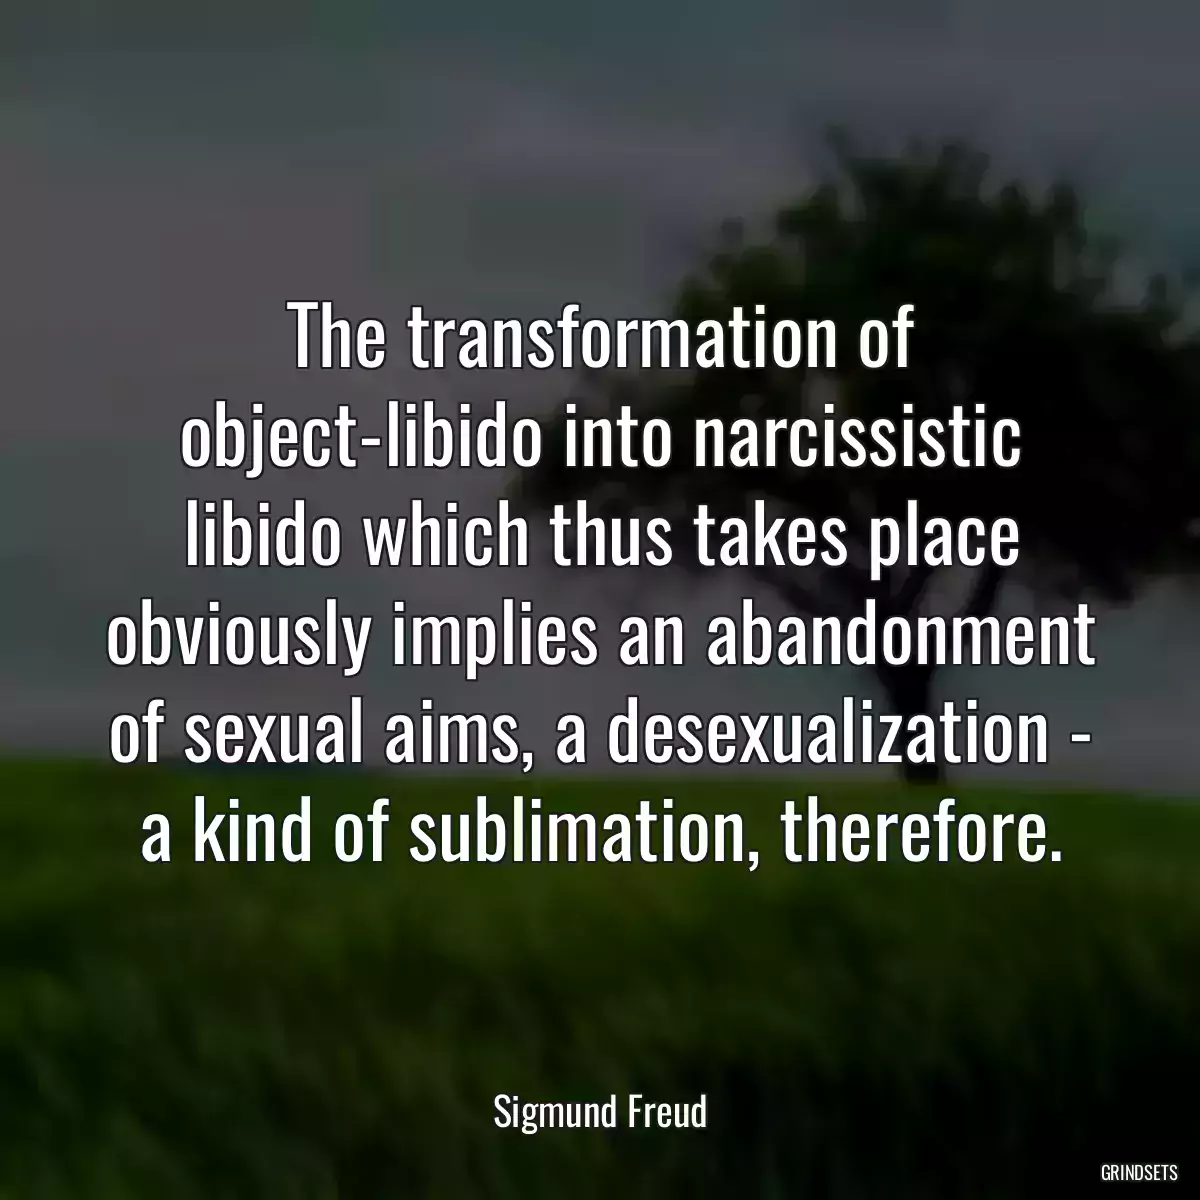 The transformation of object-libido into narcissistic libido which thus takes place obviously implies an abandonment of sexual aims, a desexualization - a kind of sublimation, therefore.